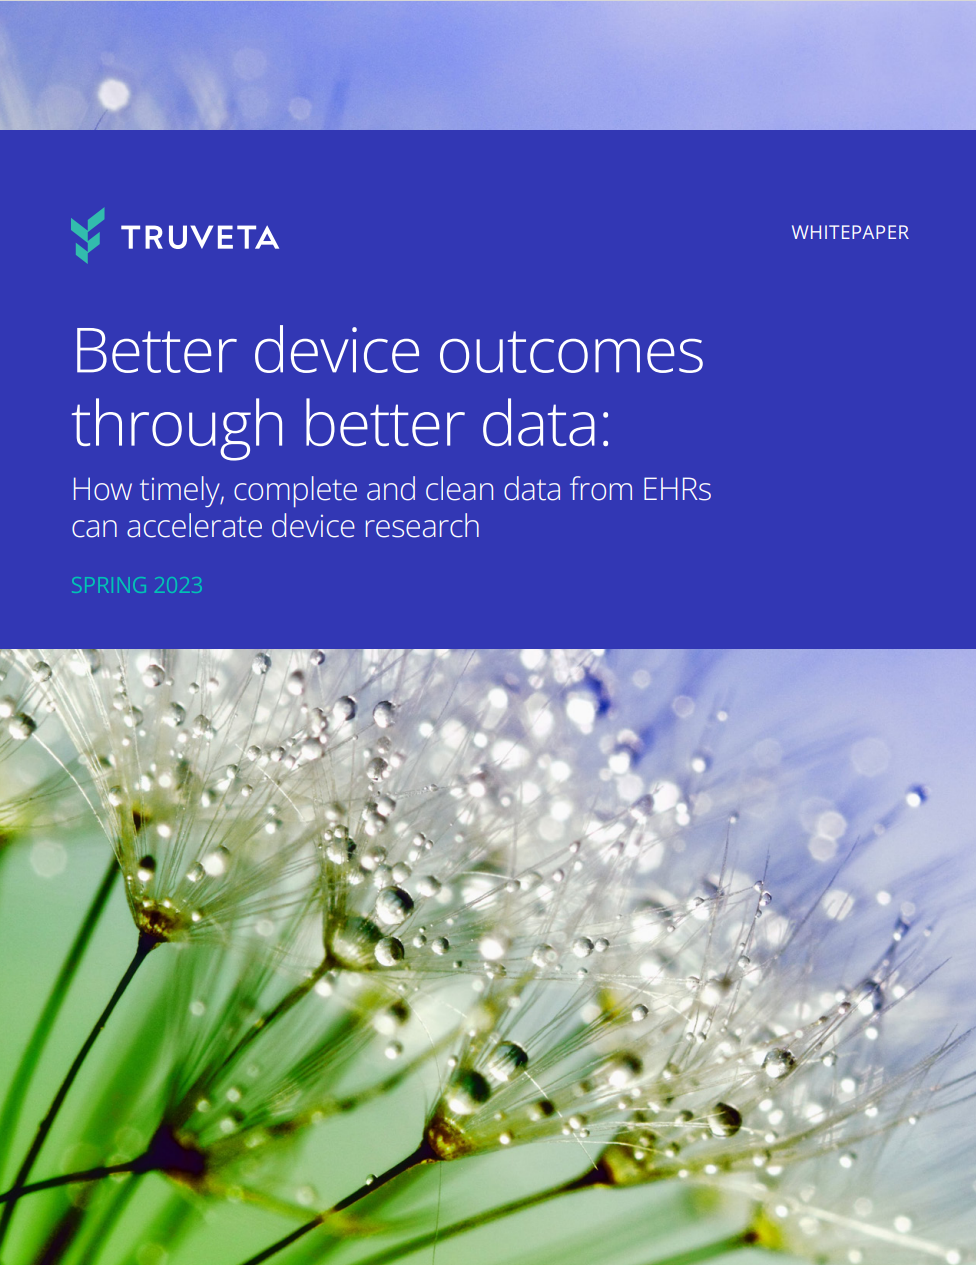 Better device outcomes through better data: How timely, complete and clean data from EHRs can accelerate device research